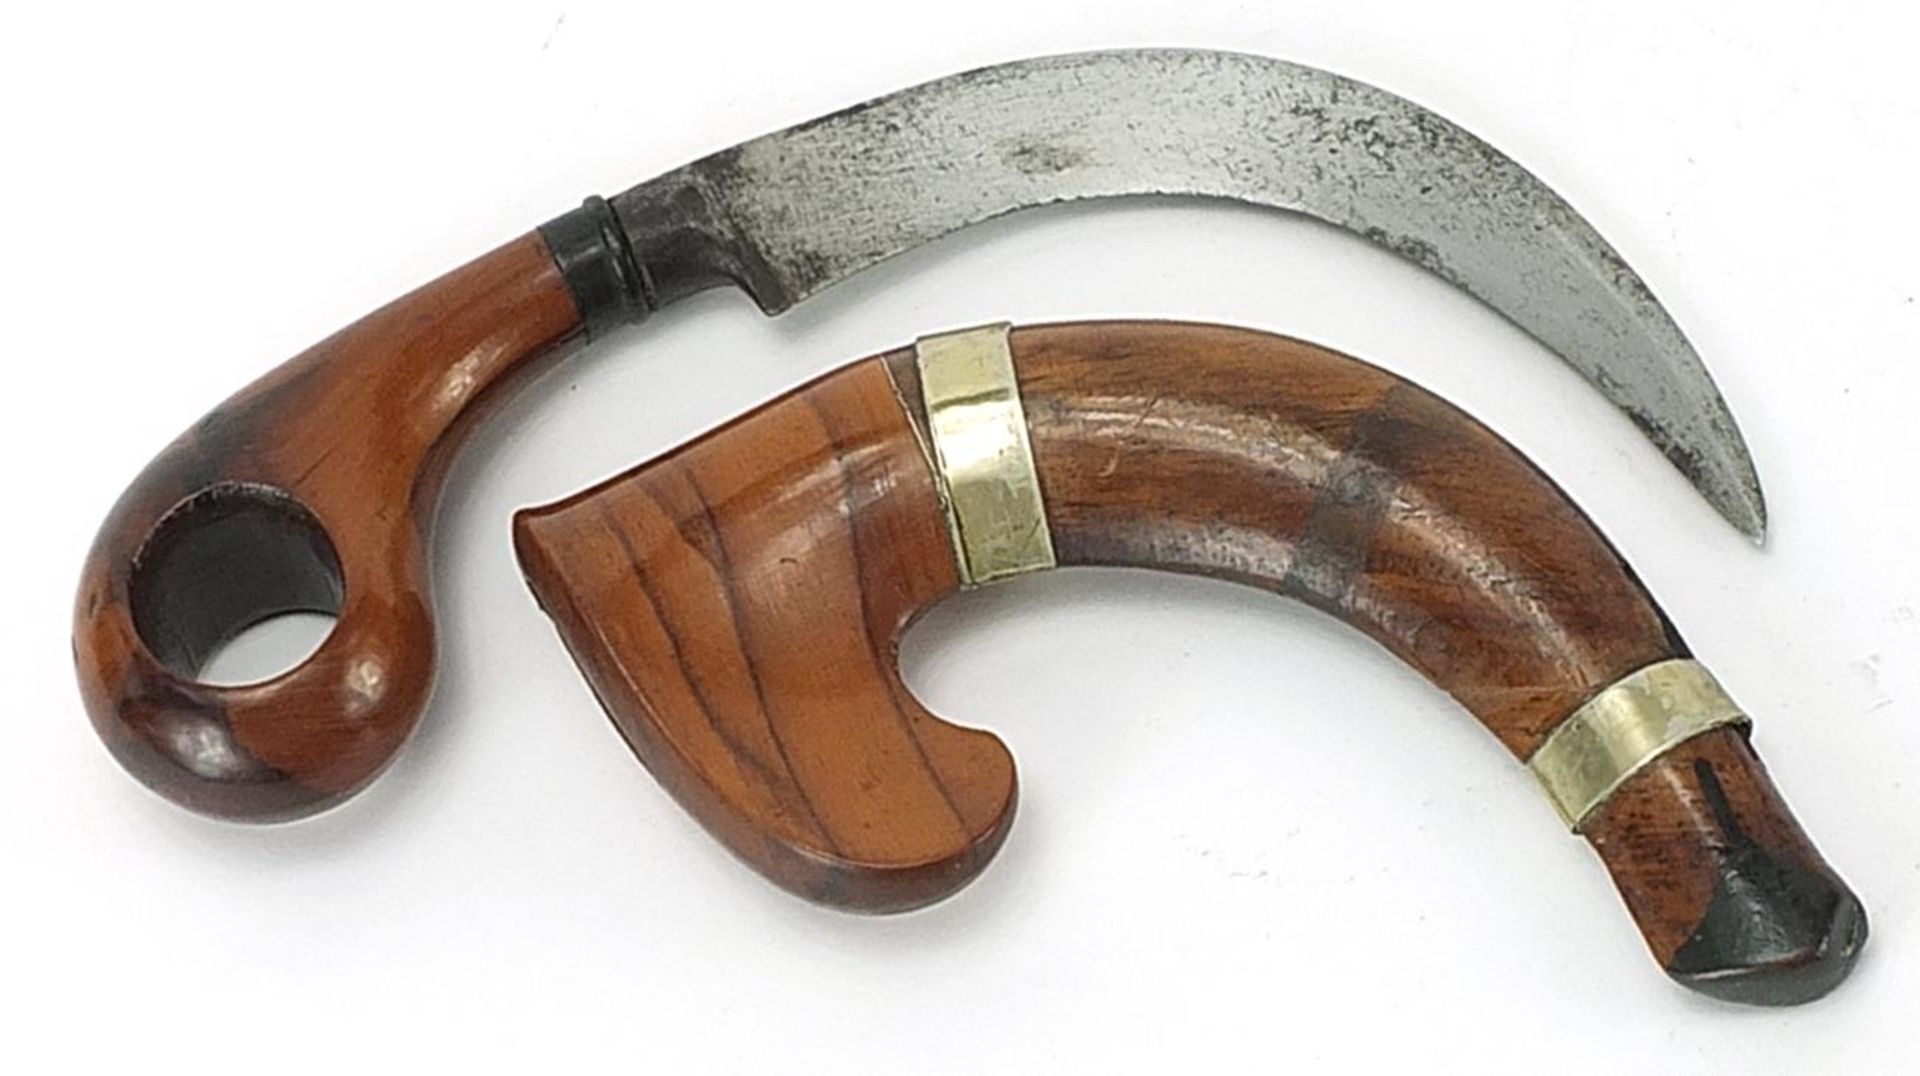 Unusual curved knife with steel blade and hardwood sheath, 17.5cm in length - Image 2 of 2